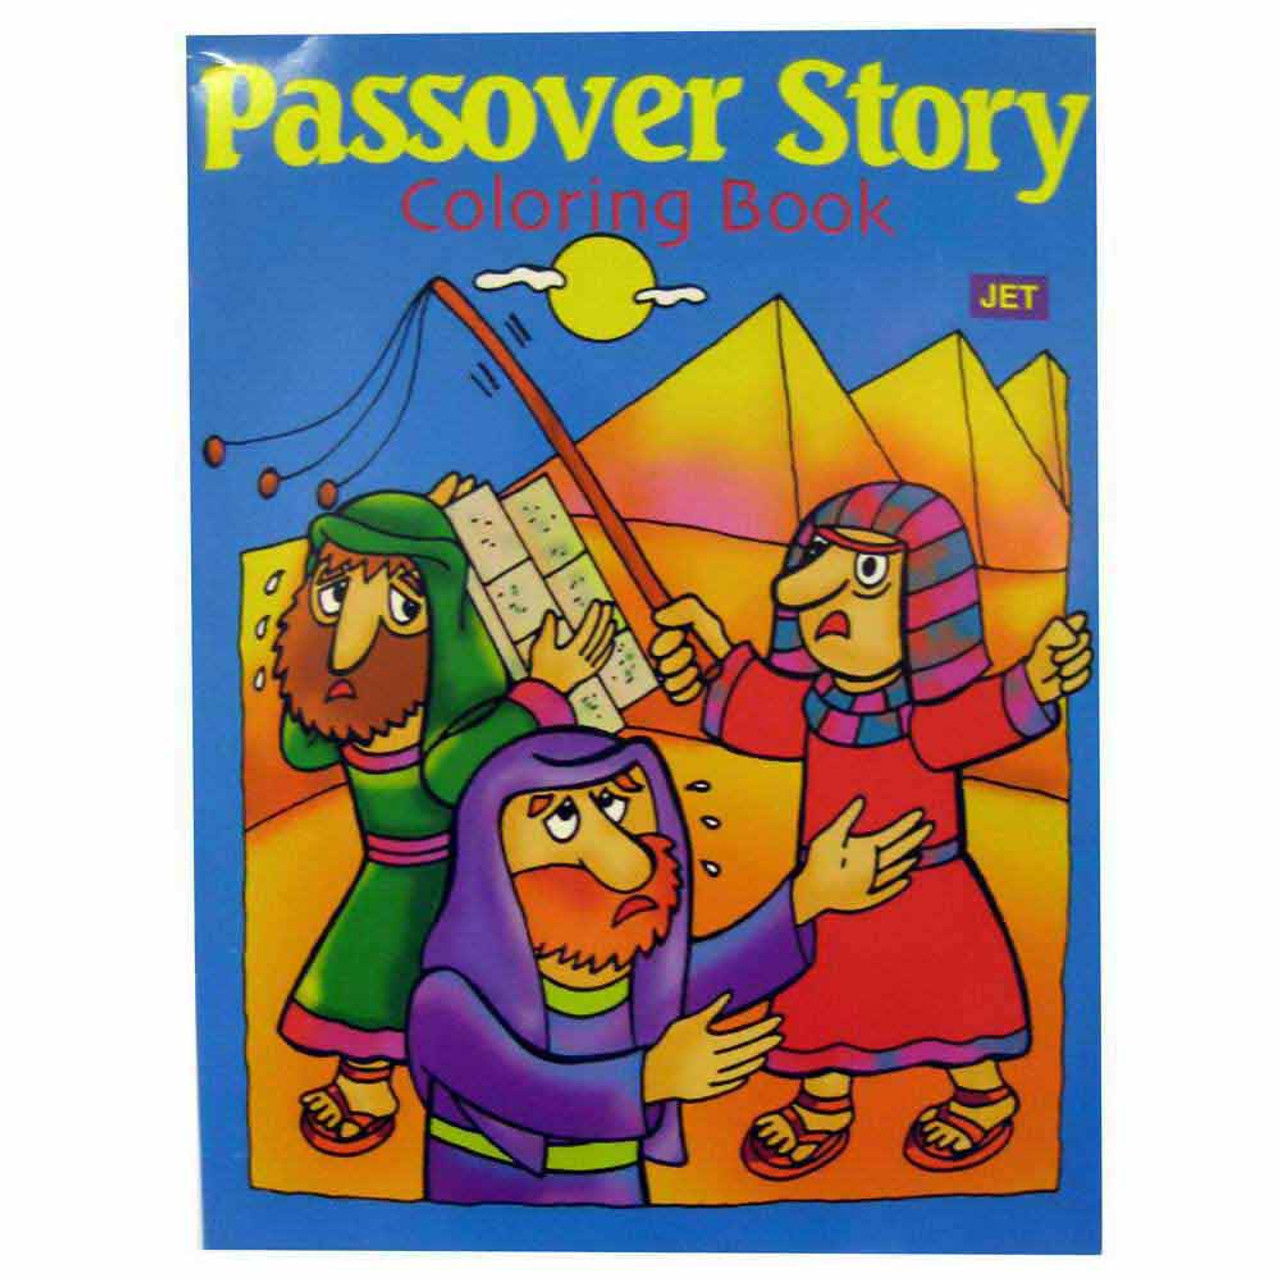 Passover story coloring bookpassover